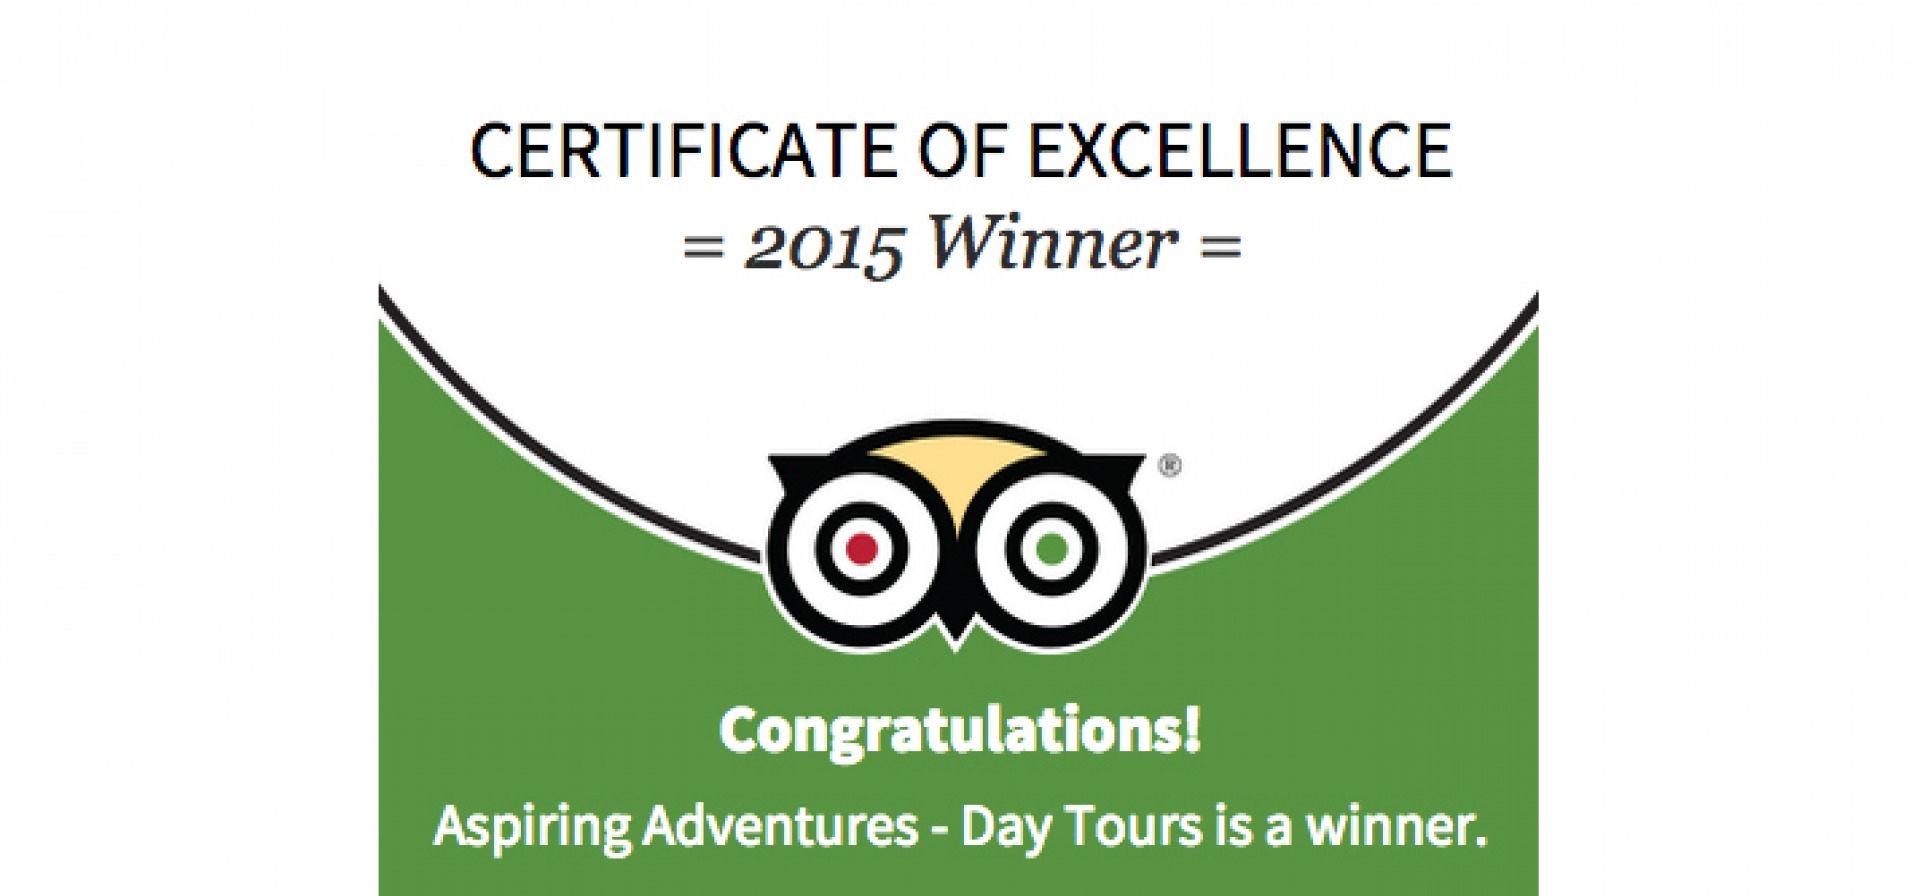 Our small group tours of Peru awarded Trip Advisor Certificate of Excellence, again